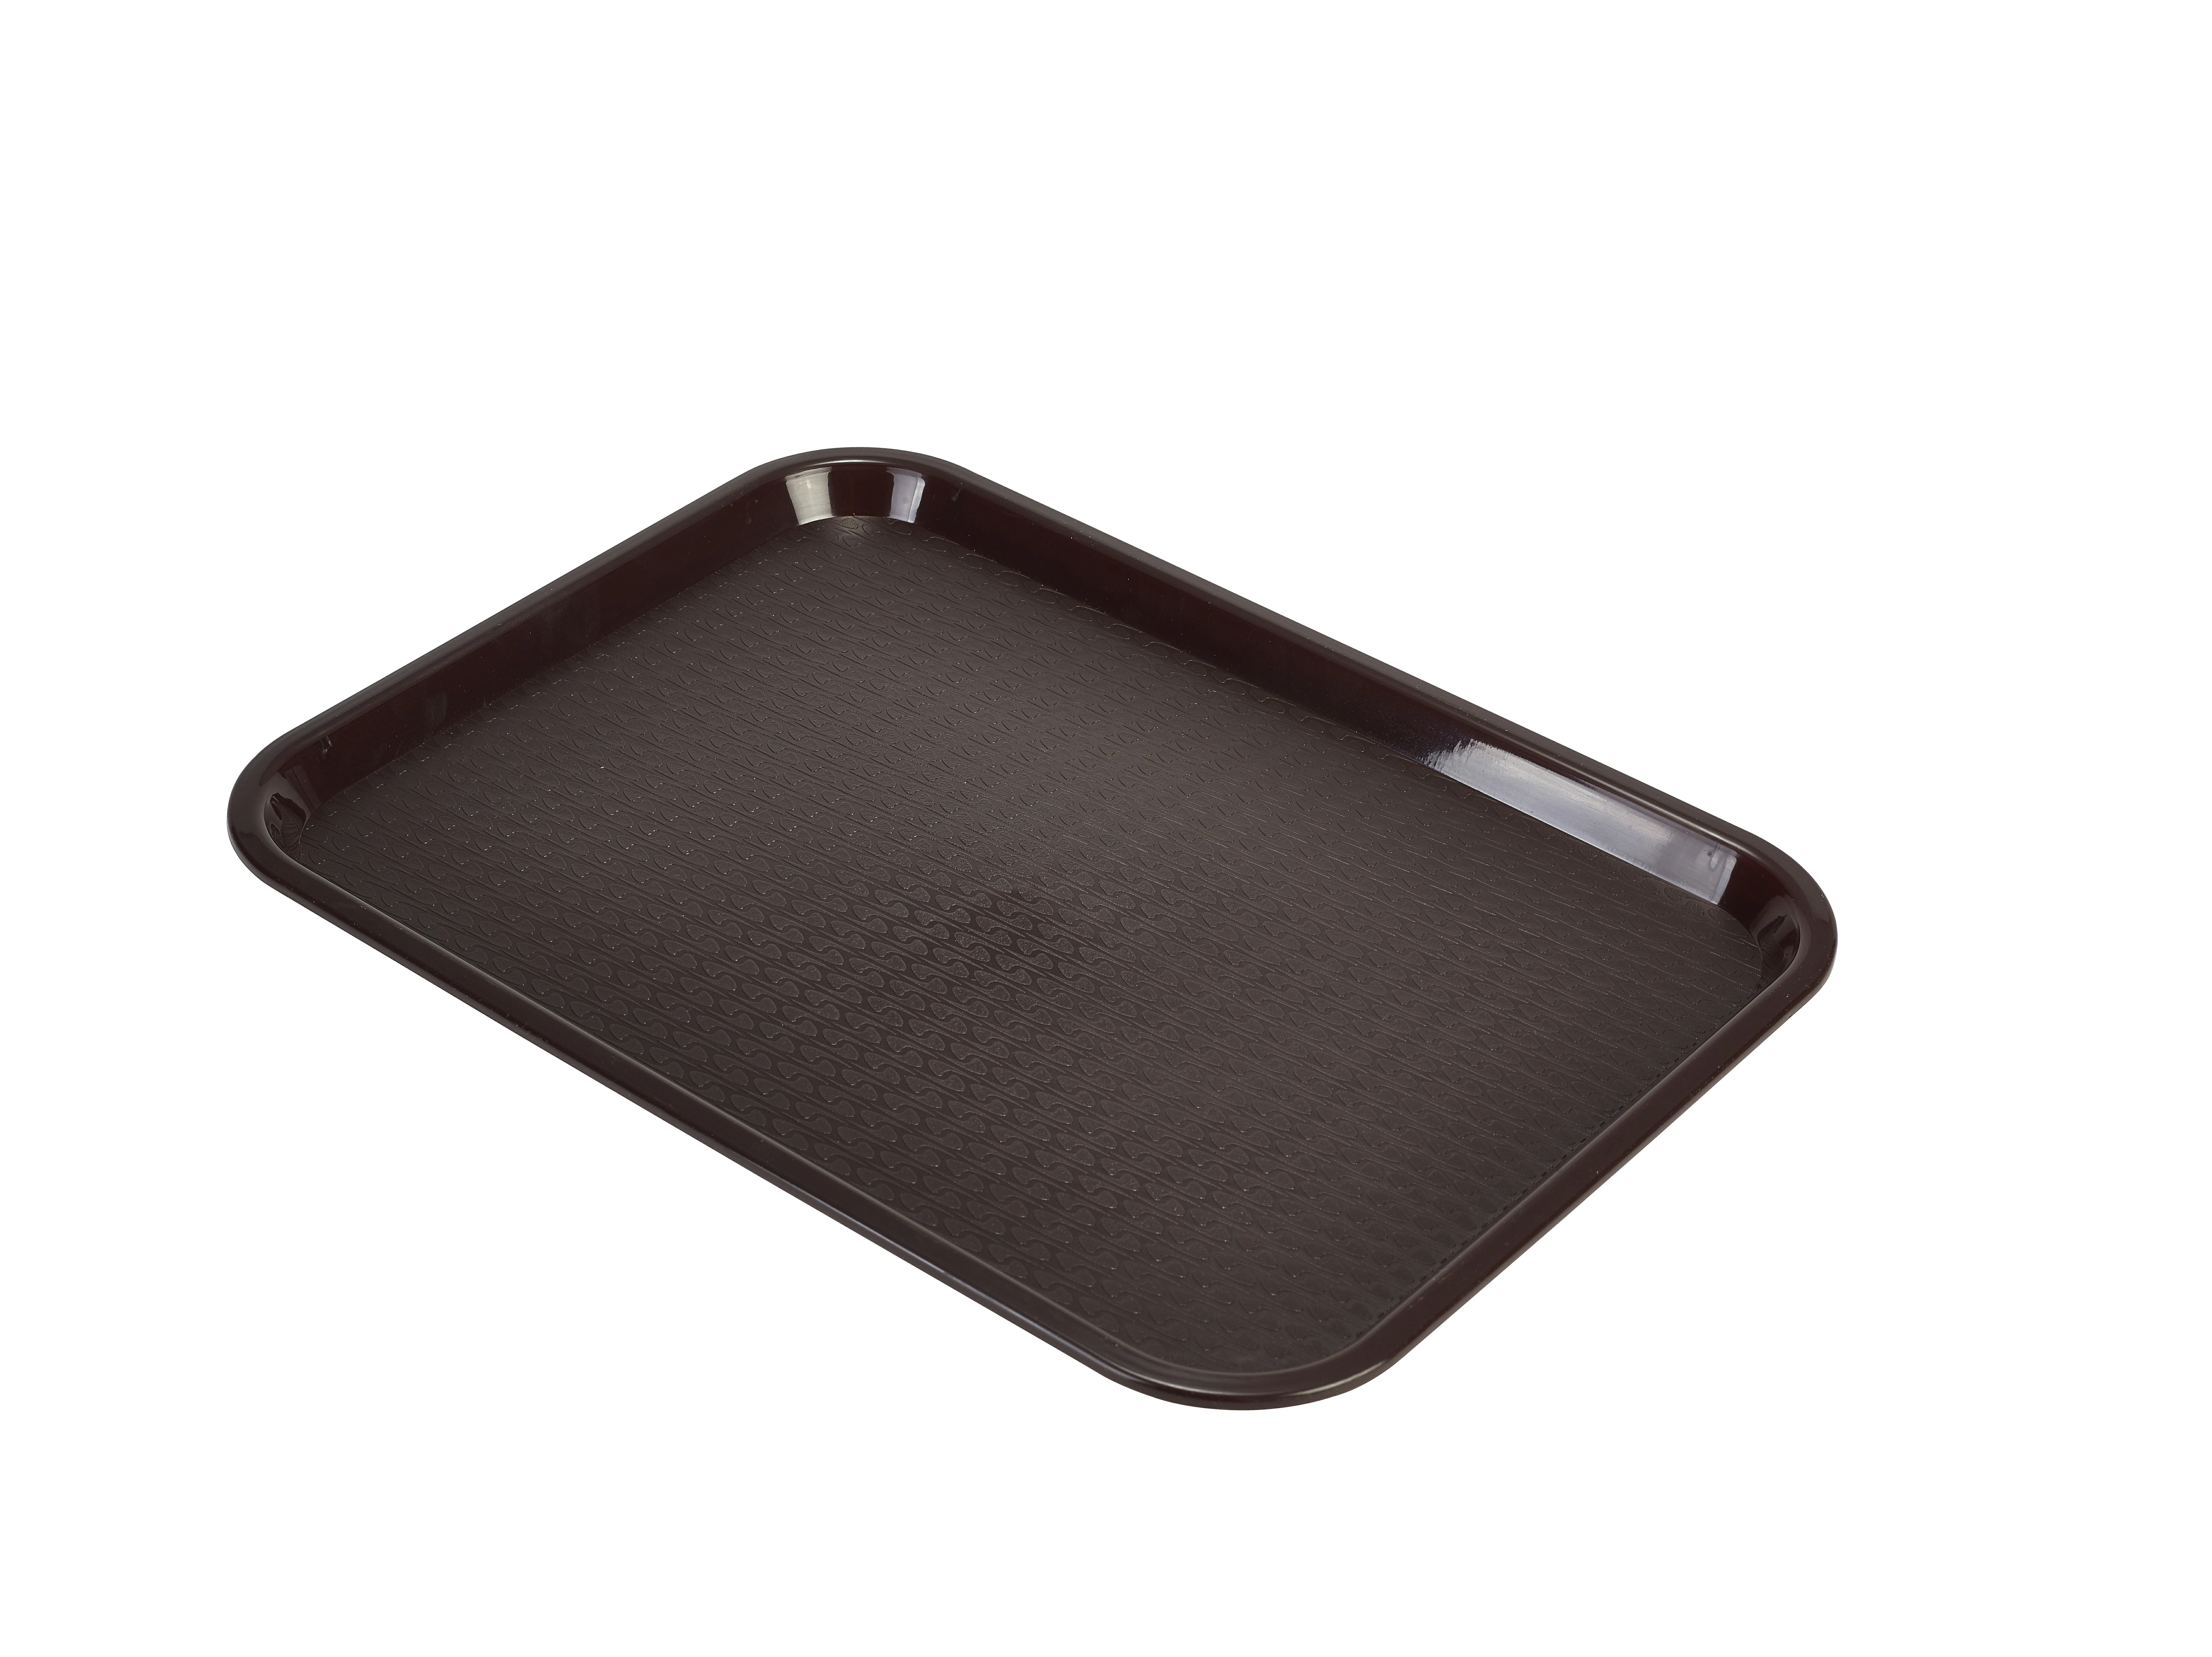 Fast Food Tray Chocolate Large